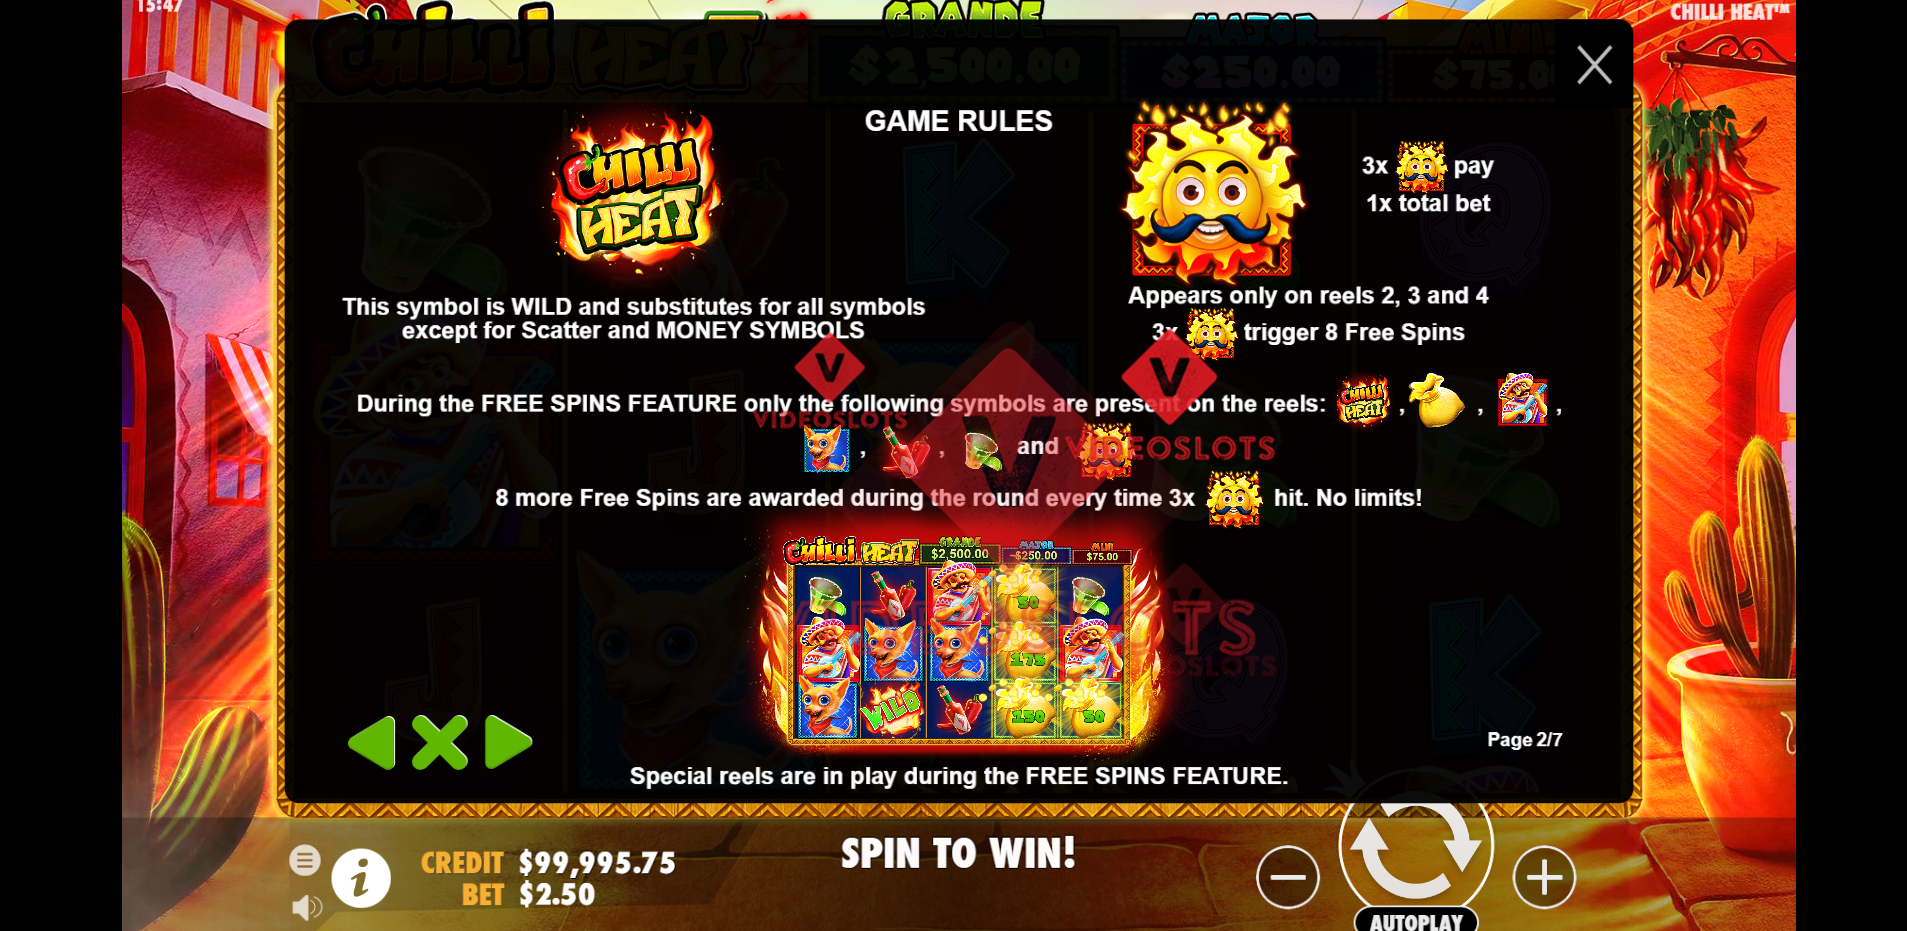 Game Rules for Chilli Heat slot by Pragmatic Play